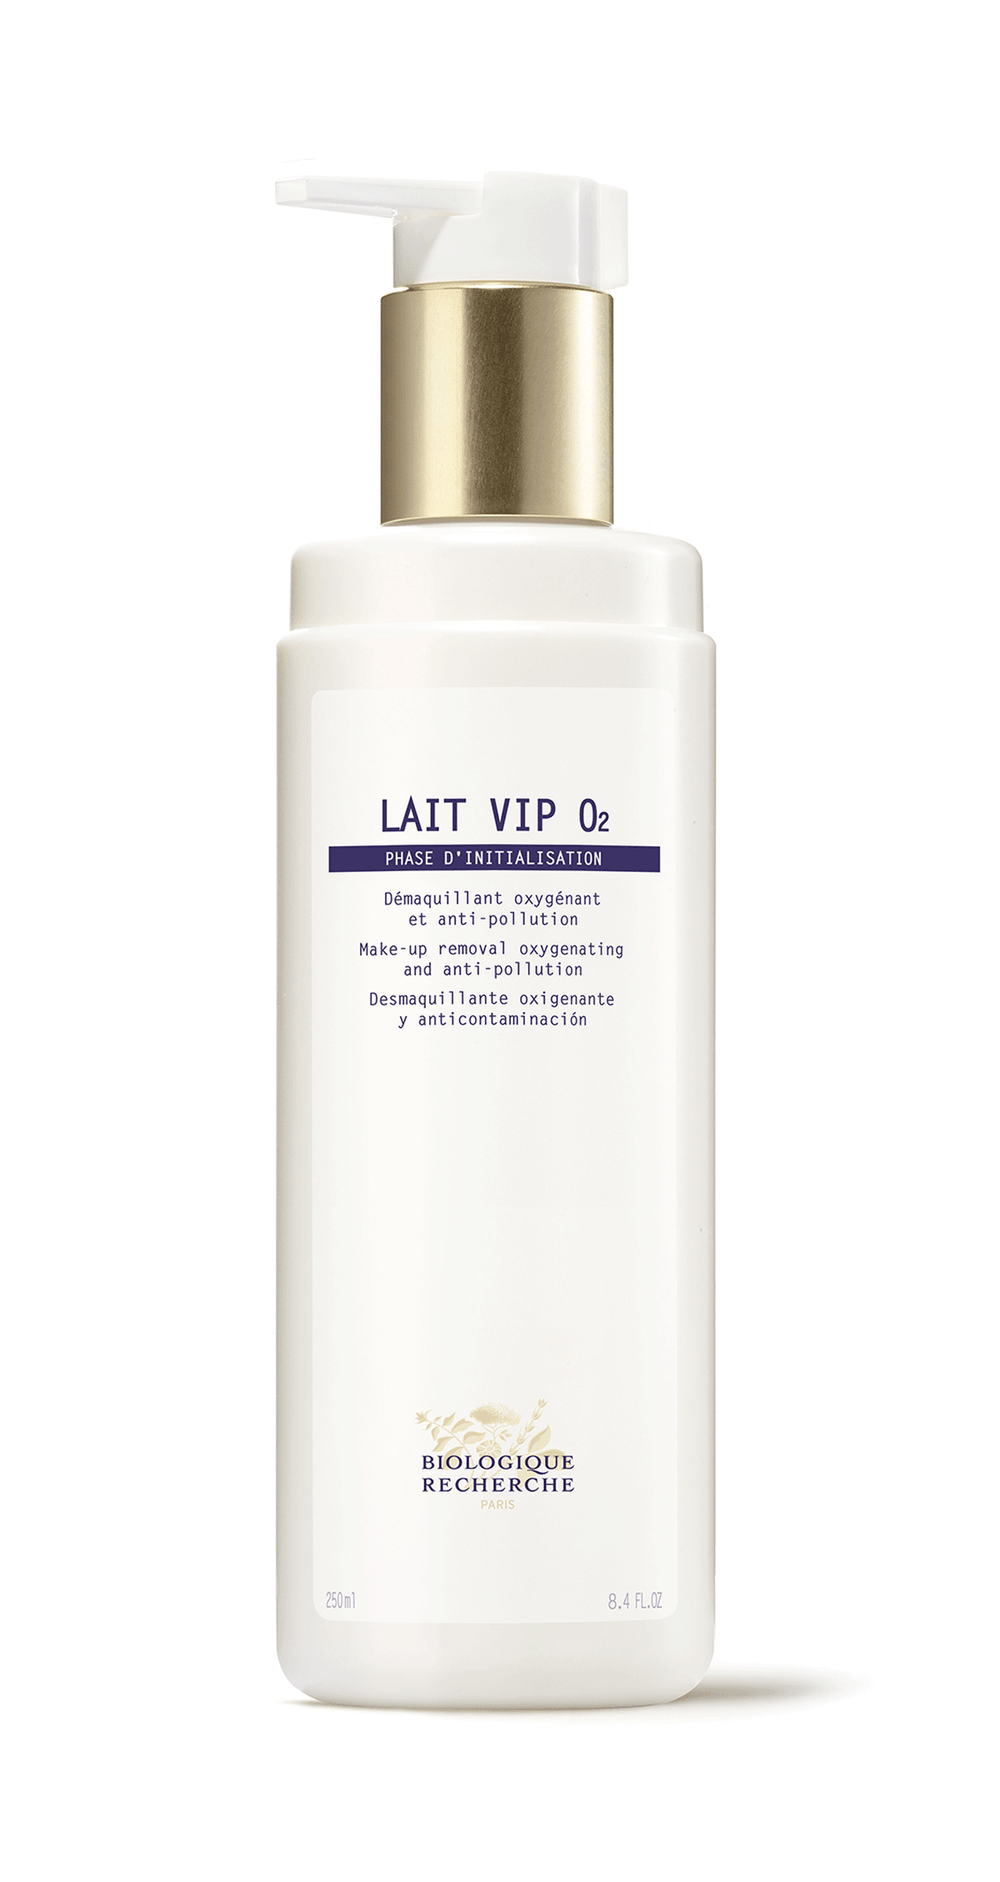 LAIT VIP O2 - Oxygenating and anti-pollution cleanser